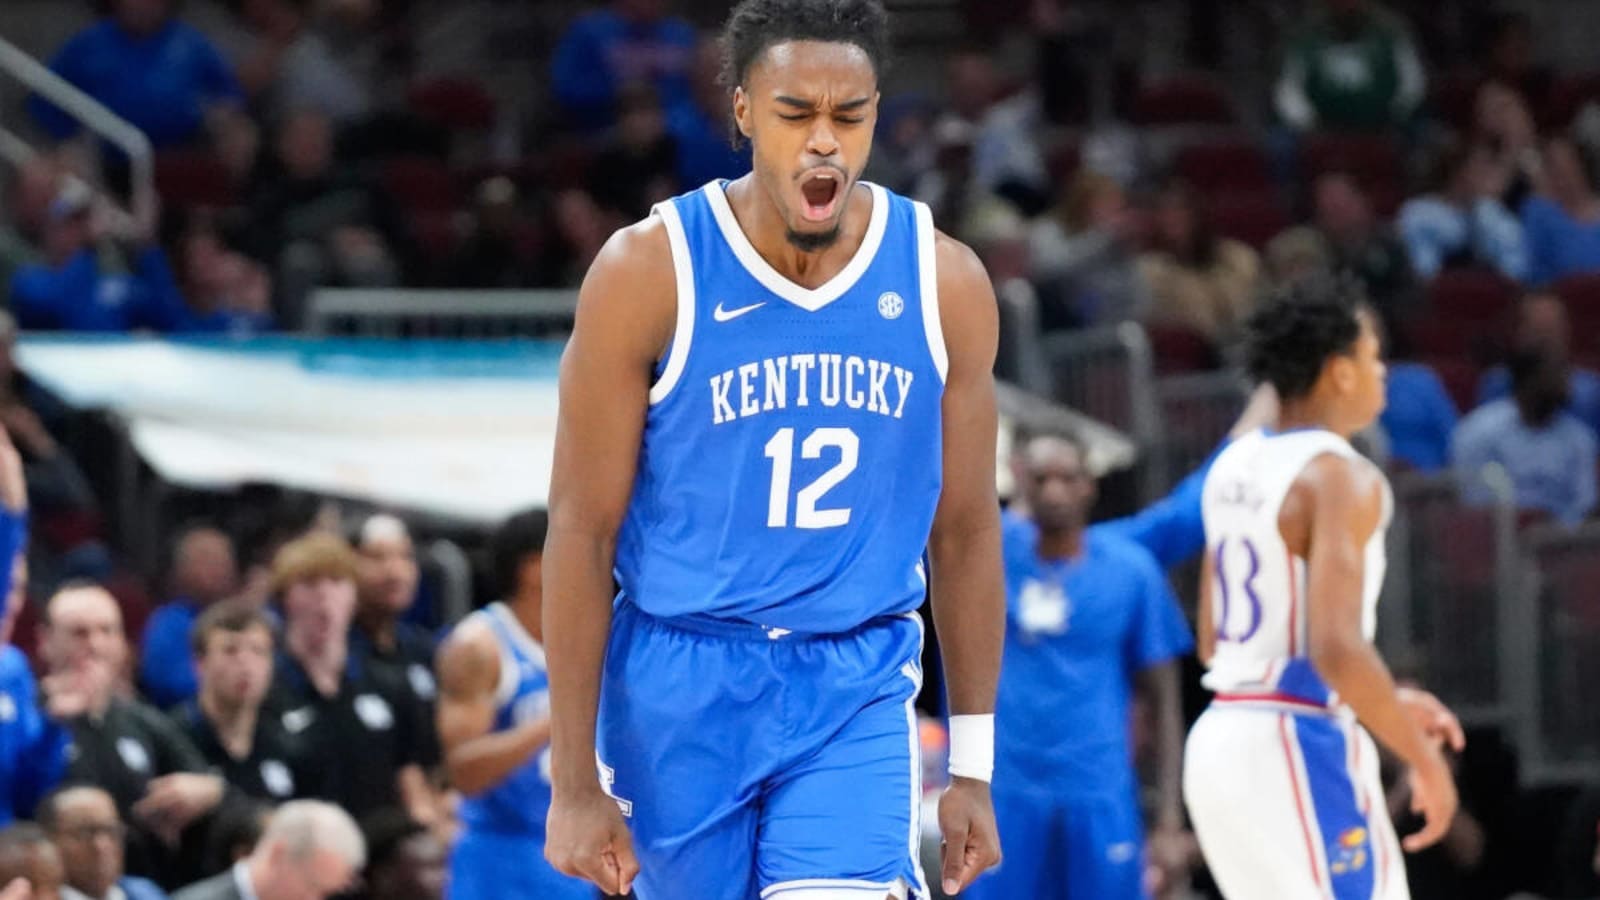 Kentucky needs a veteran to play well in the NCAA Tournament